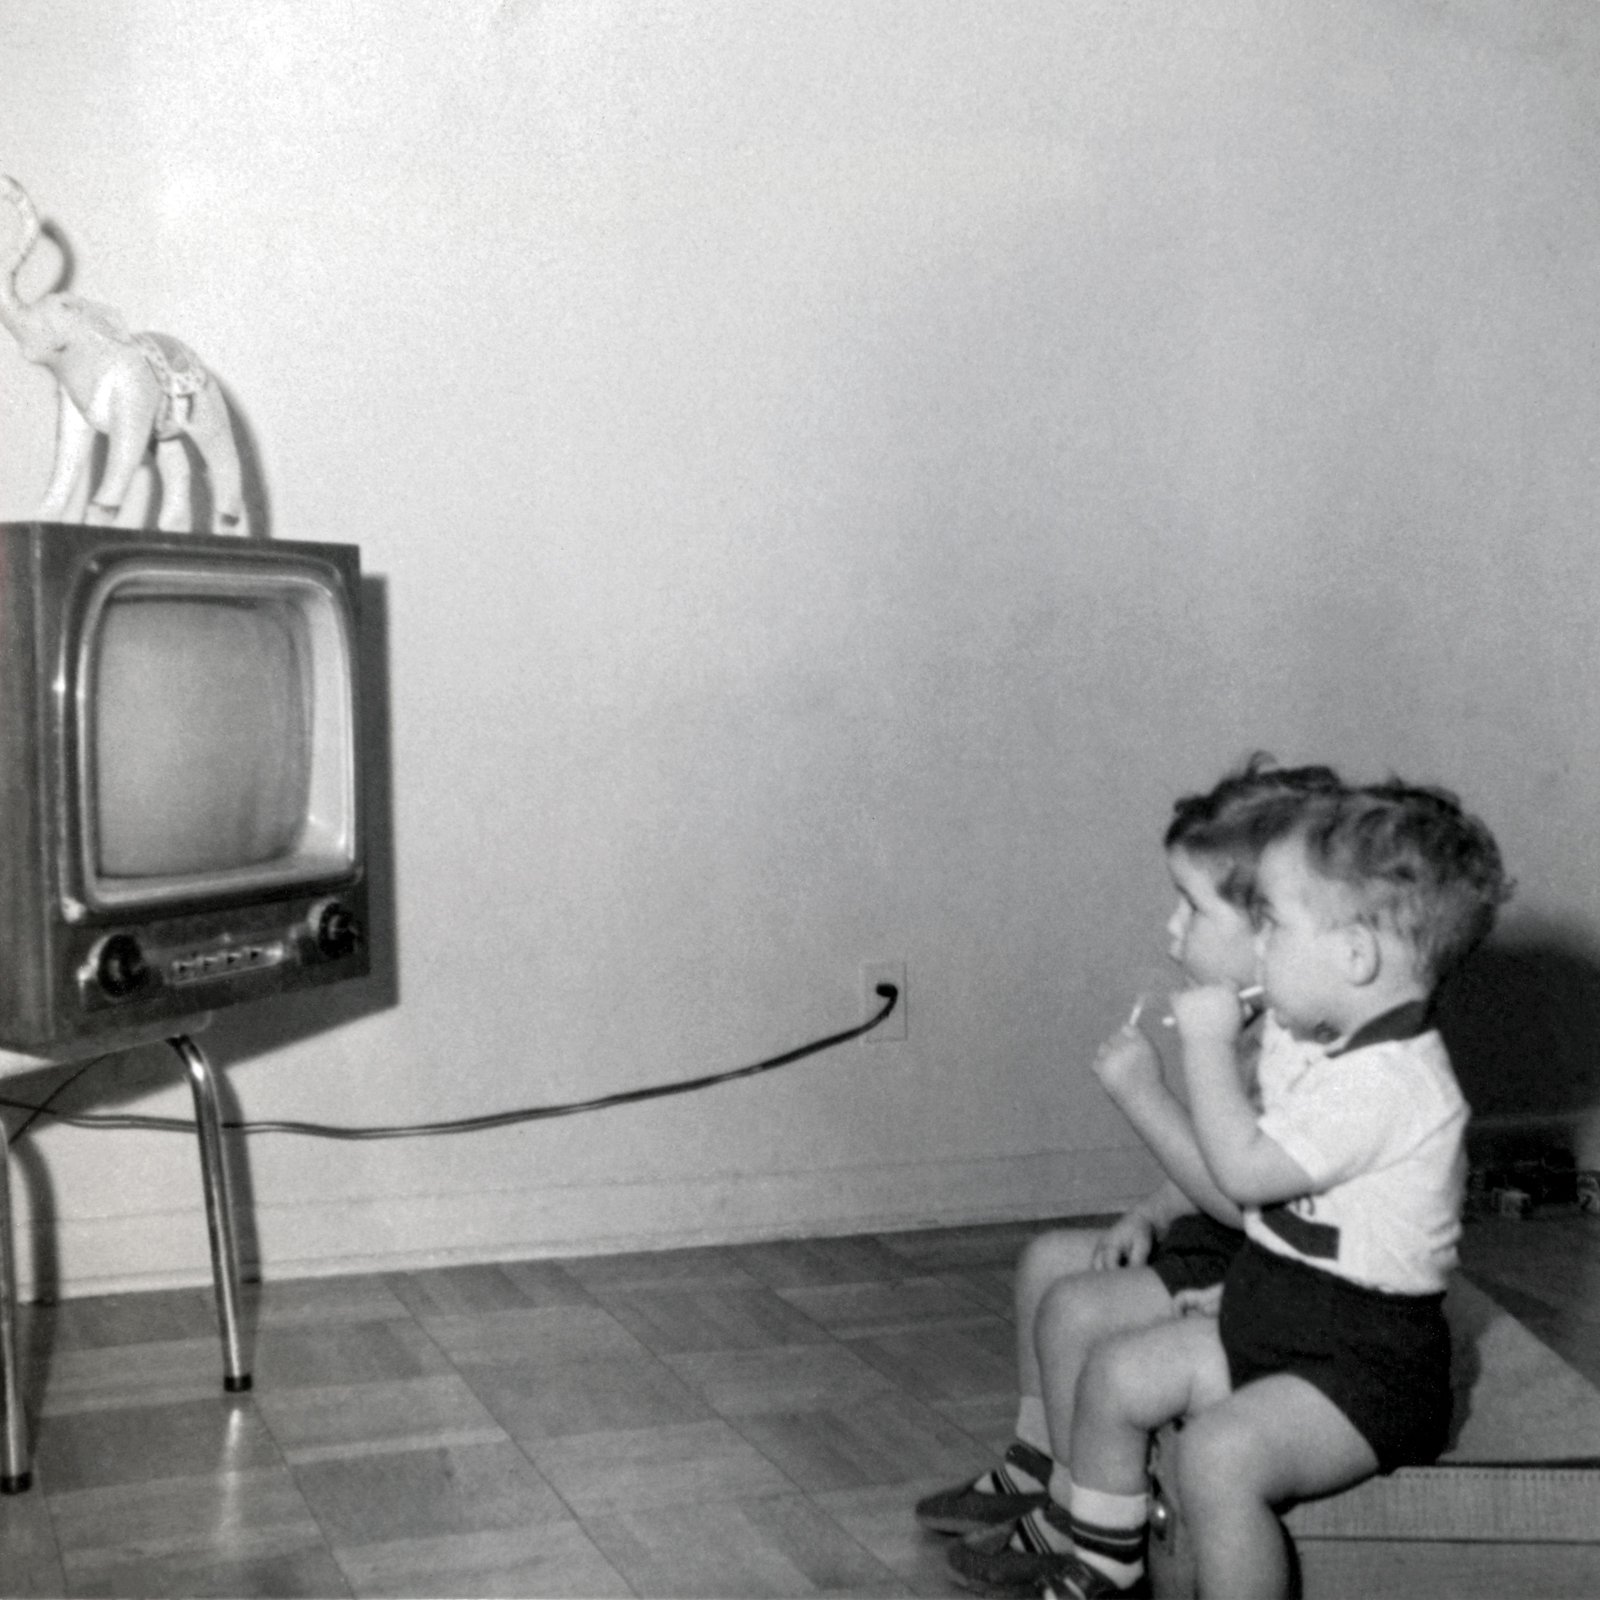 Eoin and Neil, in front of the television, January 1957.